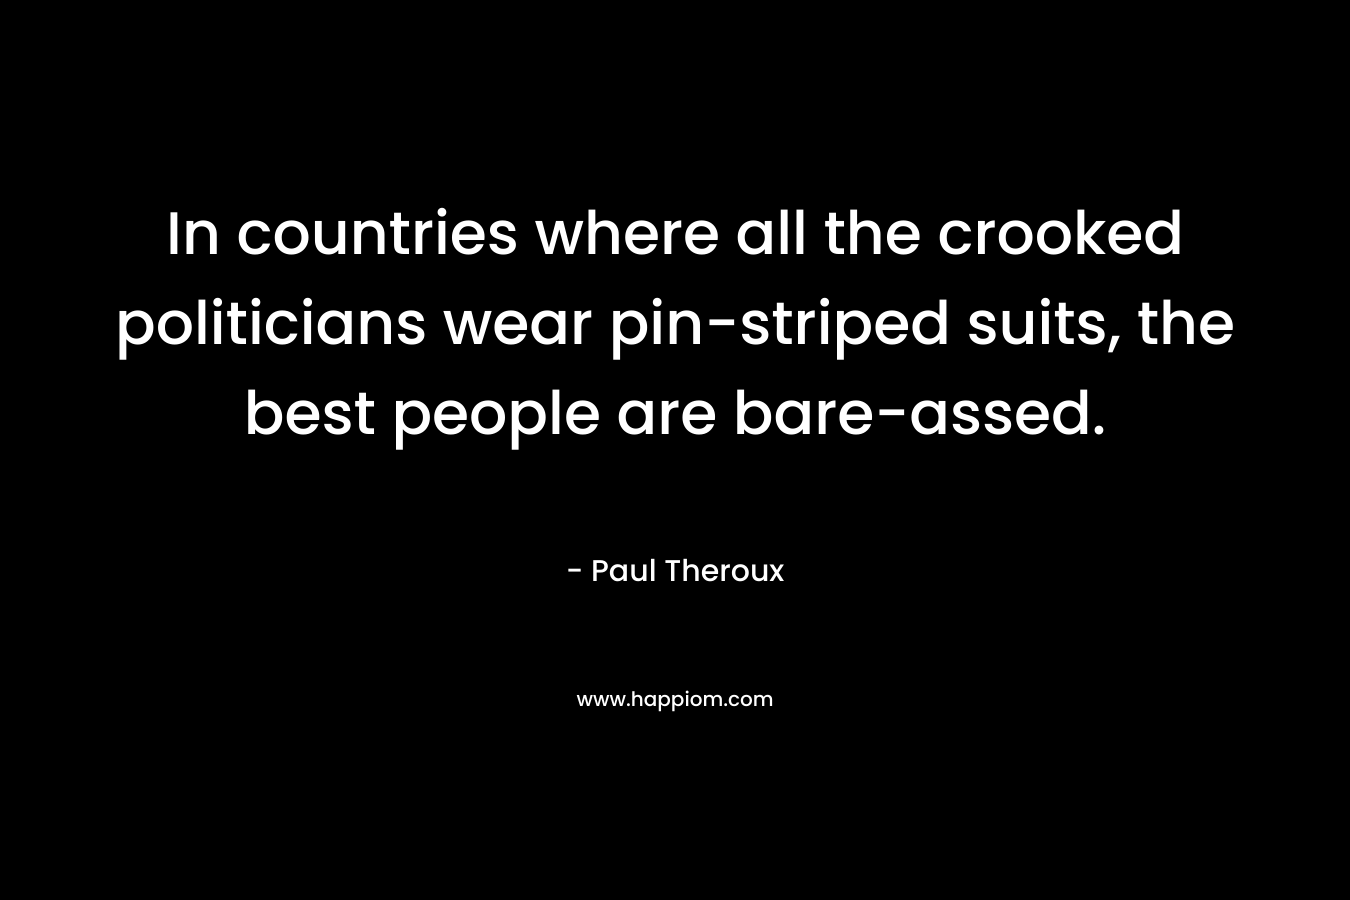 In countries where all the crooked politicians wear pin-striped suits, the best people are bare-assed. – Paul Theroux